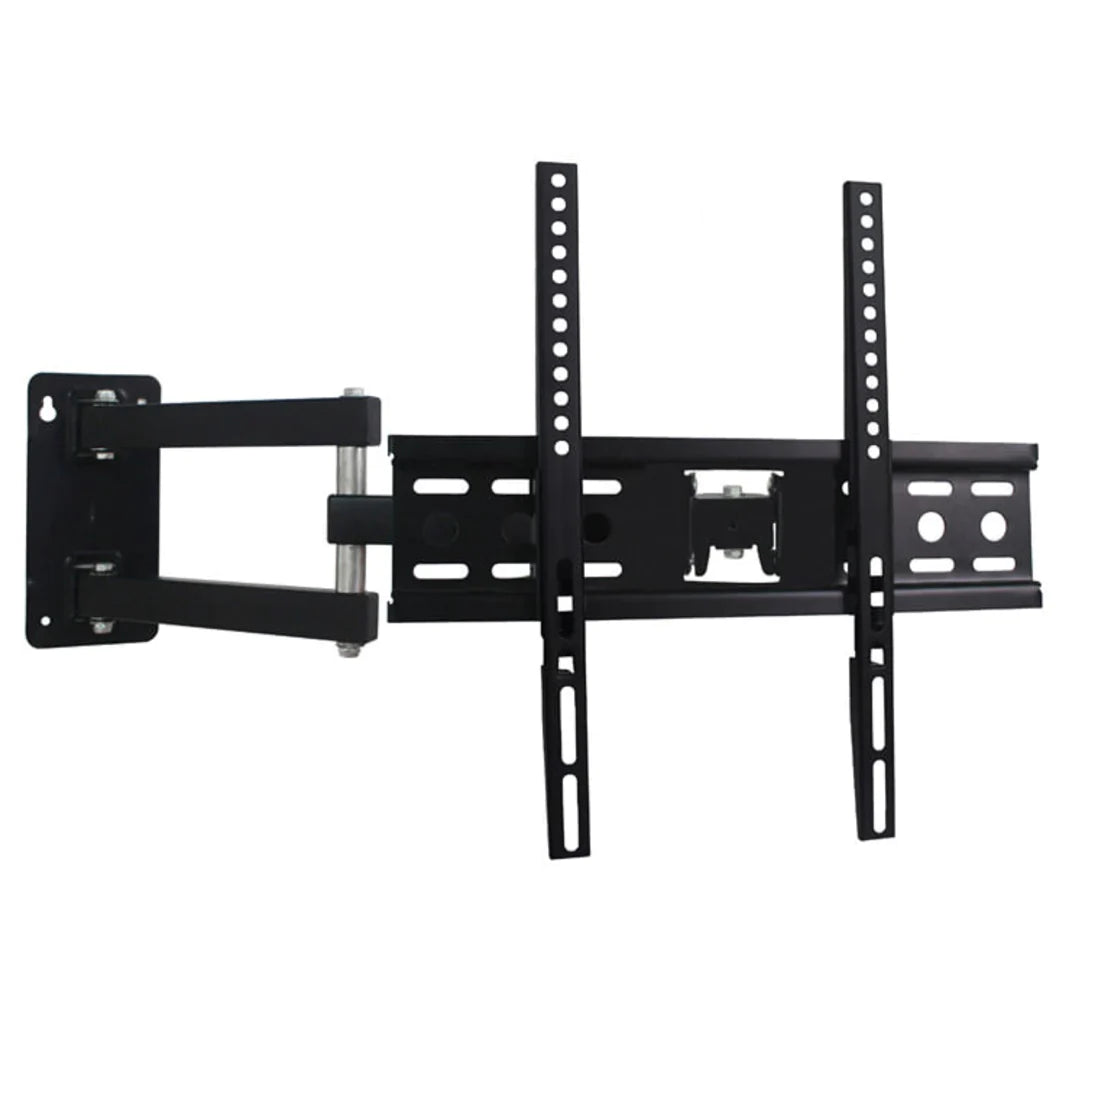 Full Motion Movable LED TV Wall Bracket Mount for 26-50 Inch Screens, SG-826MTB